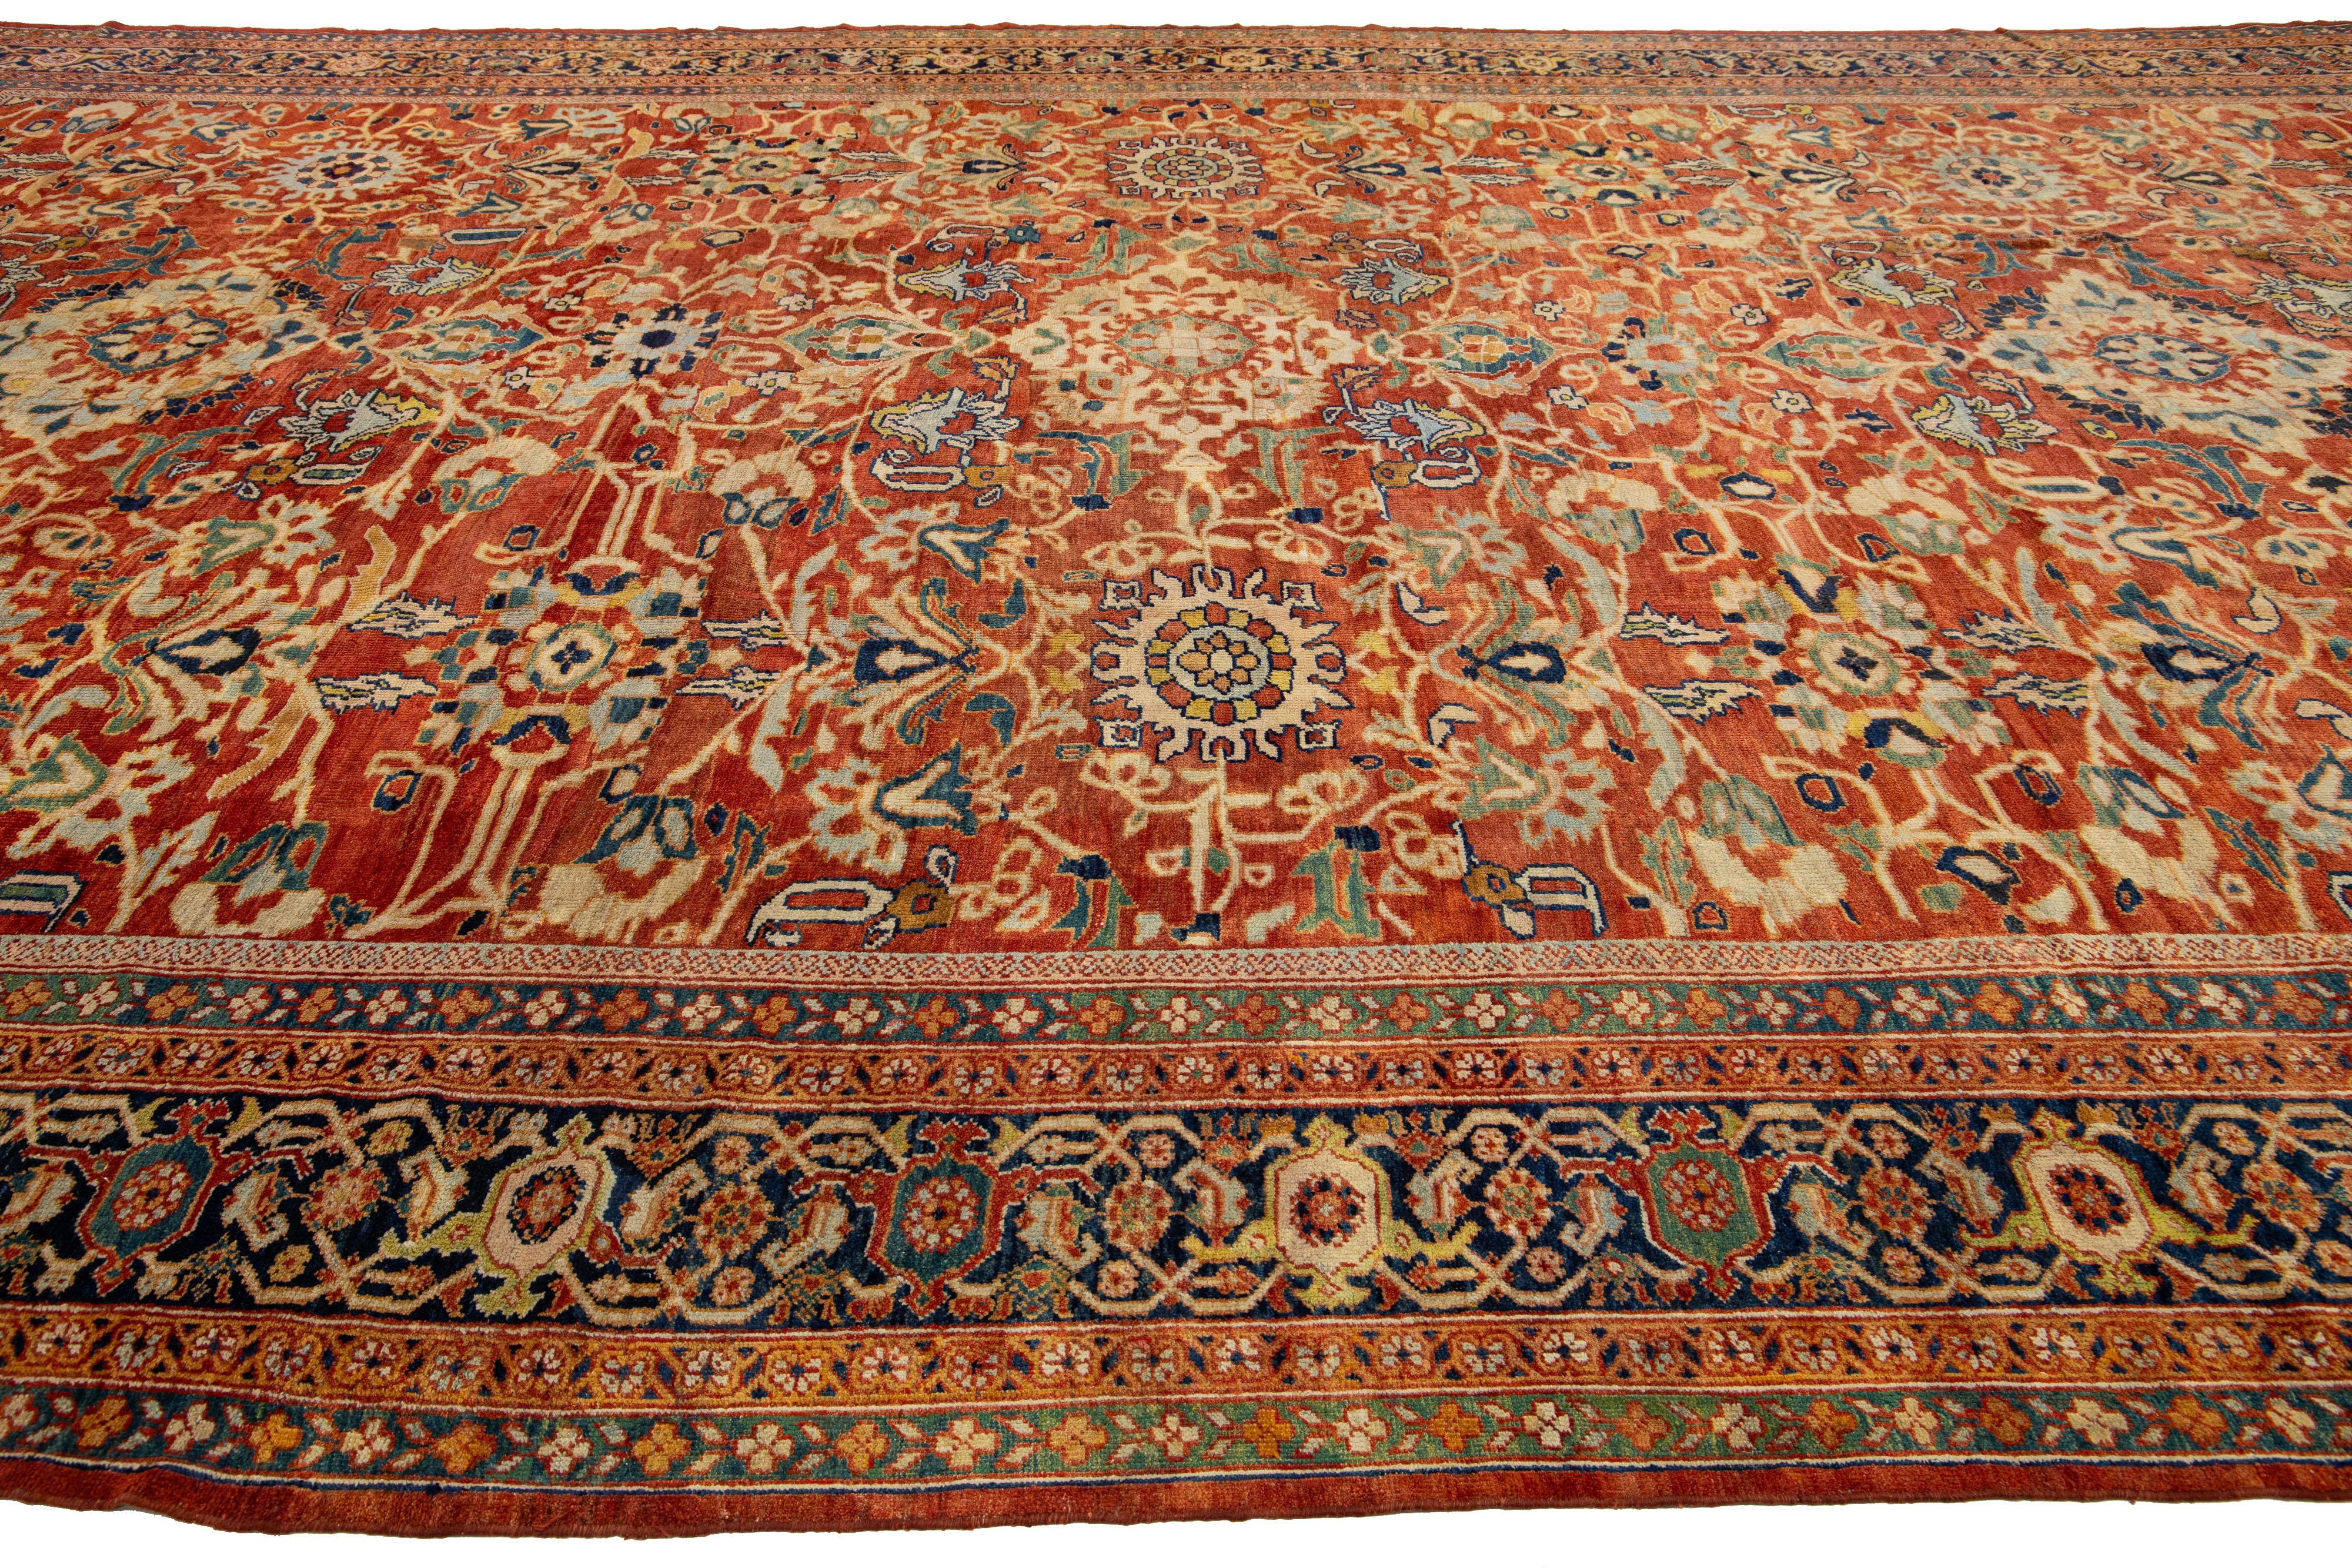 One of a Kind 1880's Antique Persian Sultanabad Allover Wool Rug In Rust Color  In Excellent Condition For Sale In Norwalk, CT